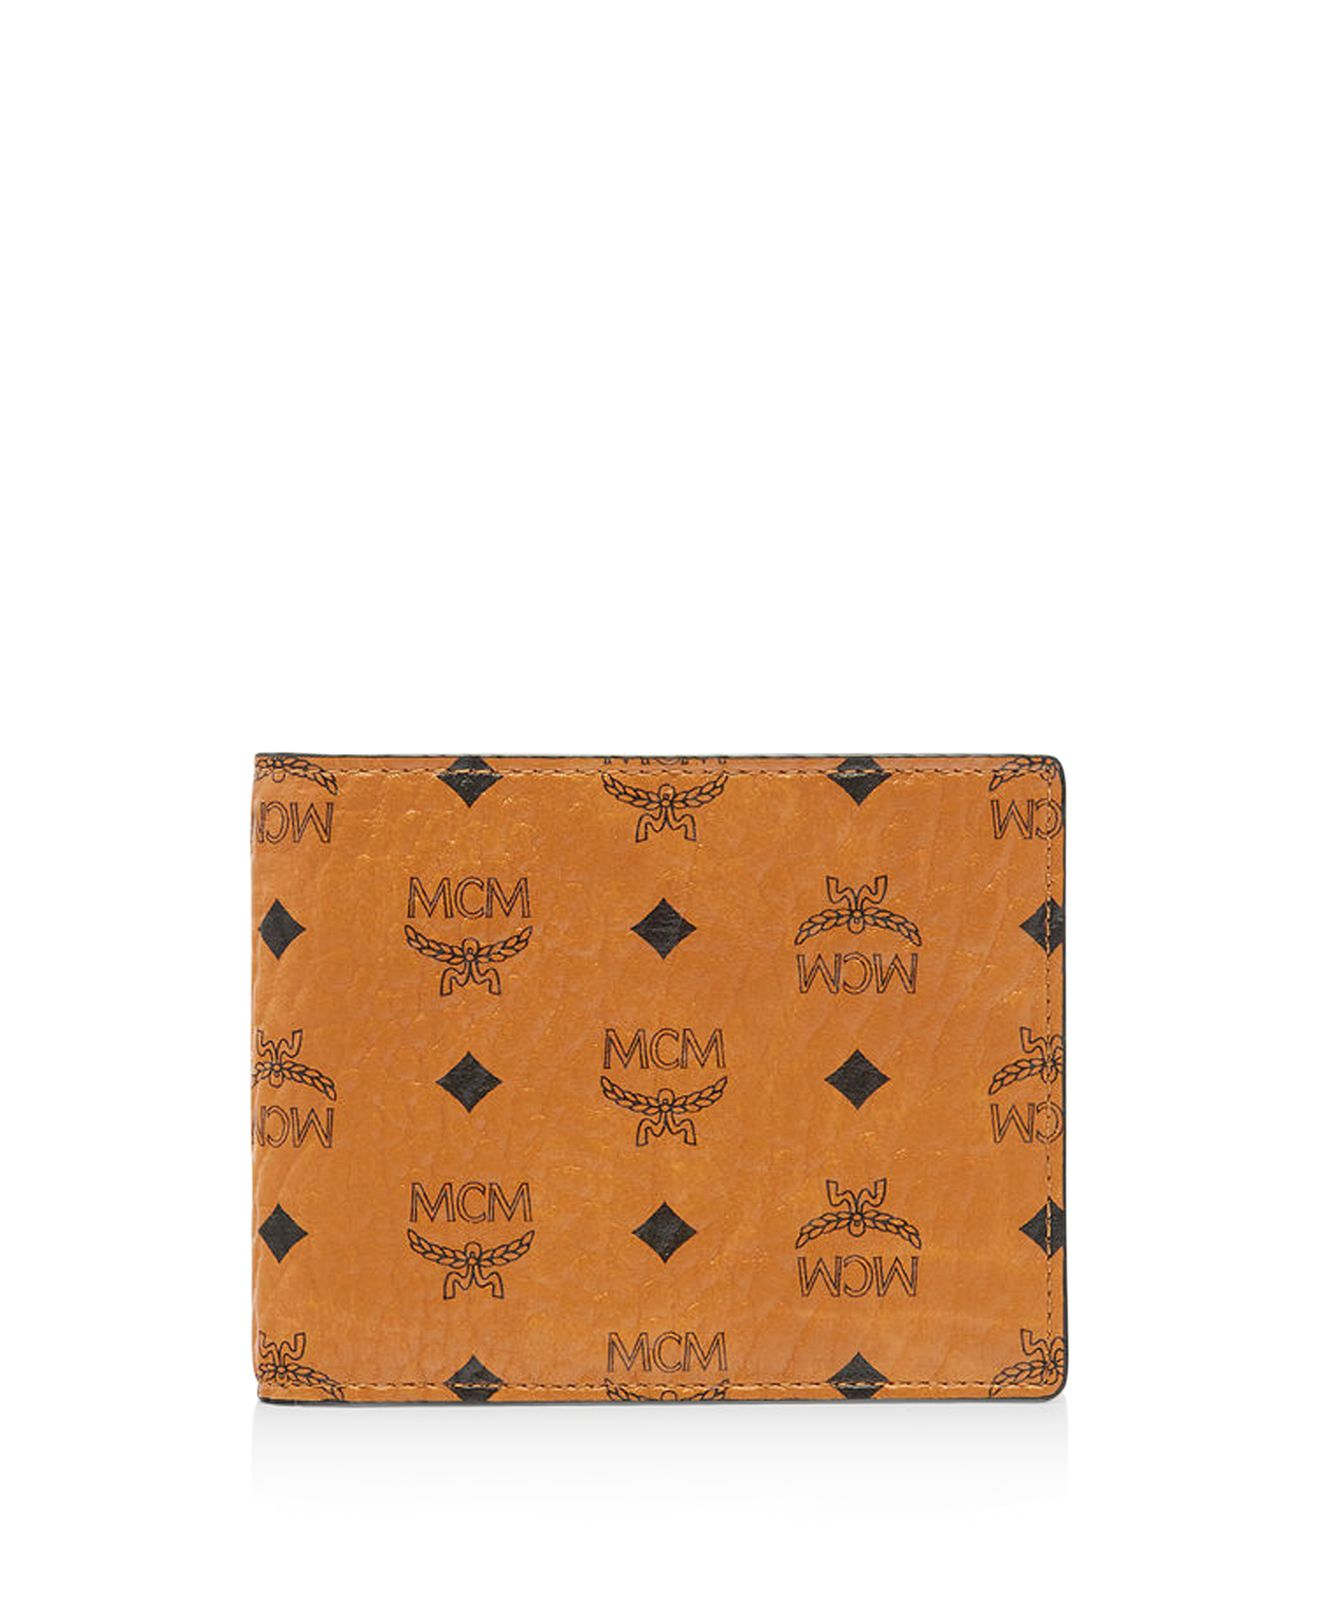 Mcm Claus Small Wallet for Men - Lyst